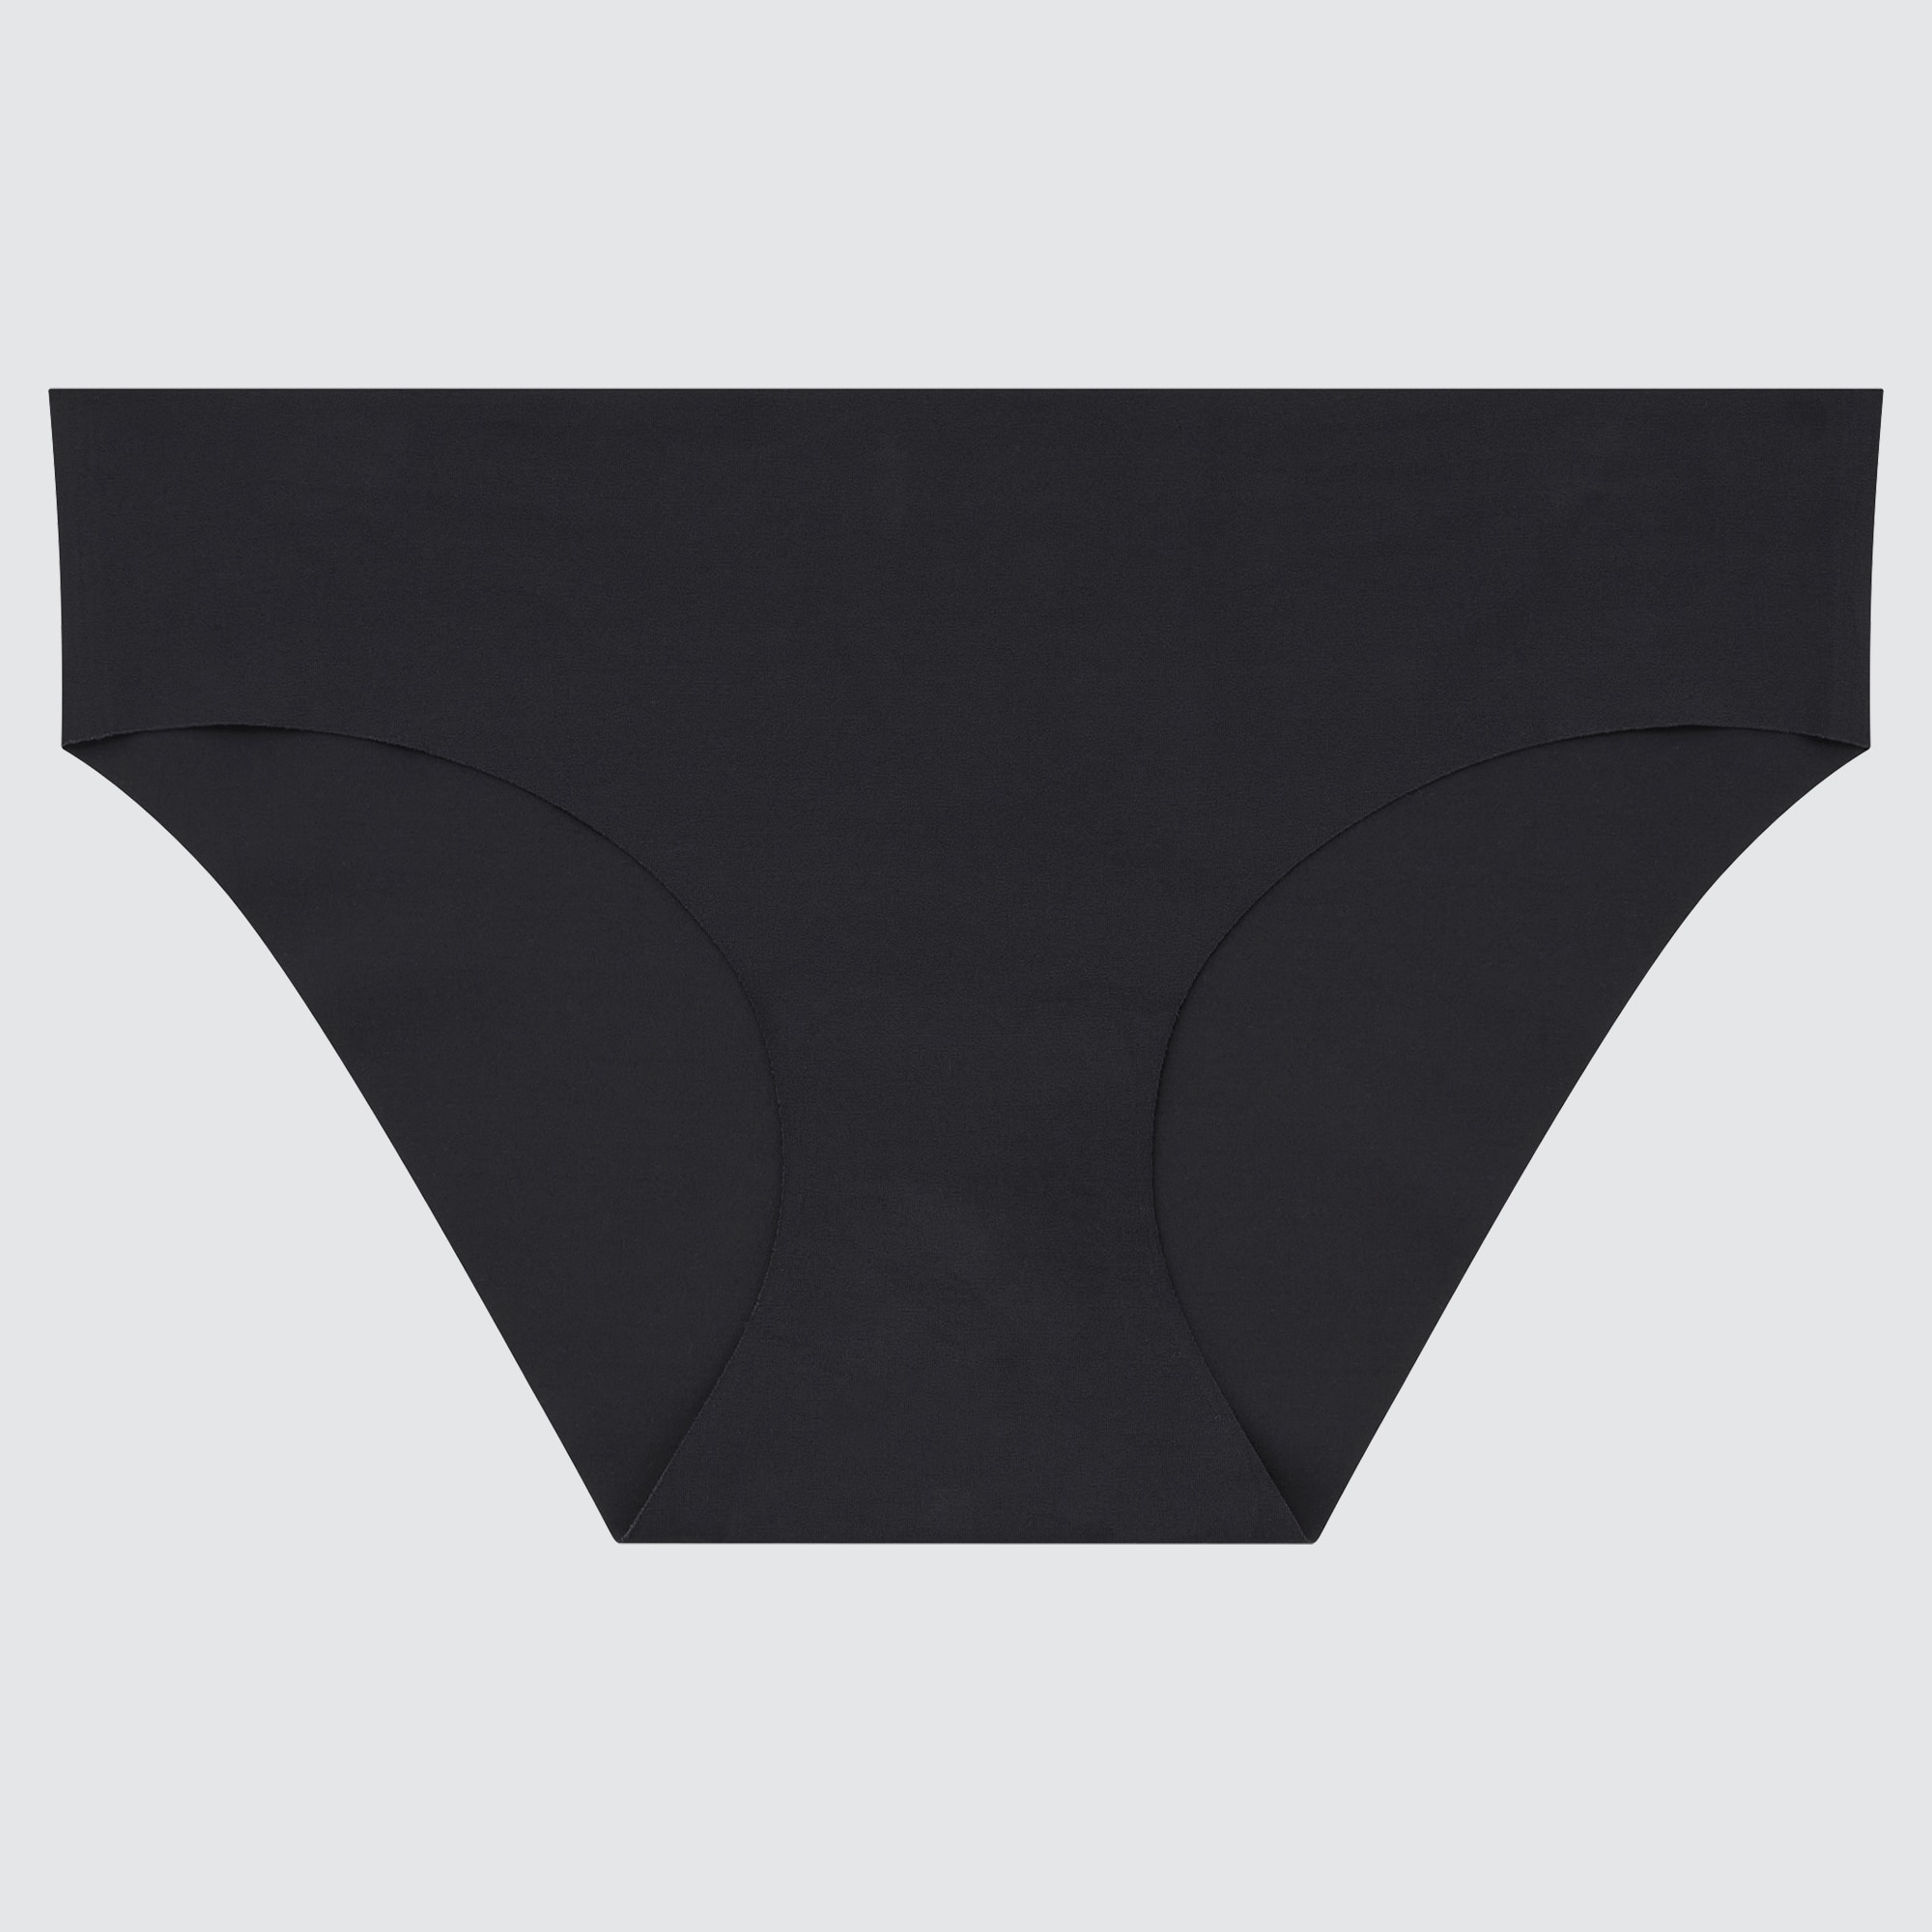 Brand New Auth Uniqlo Women Airism Seamless Panty - No Packaging